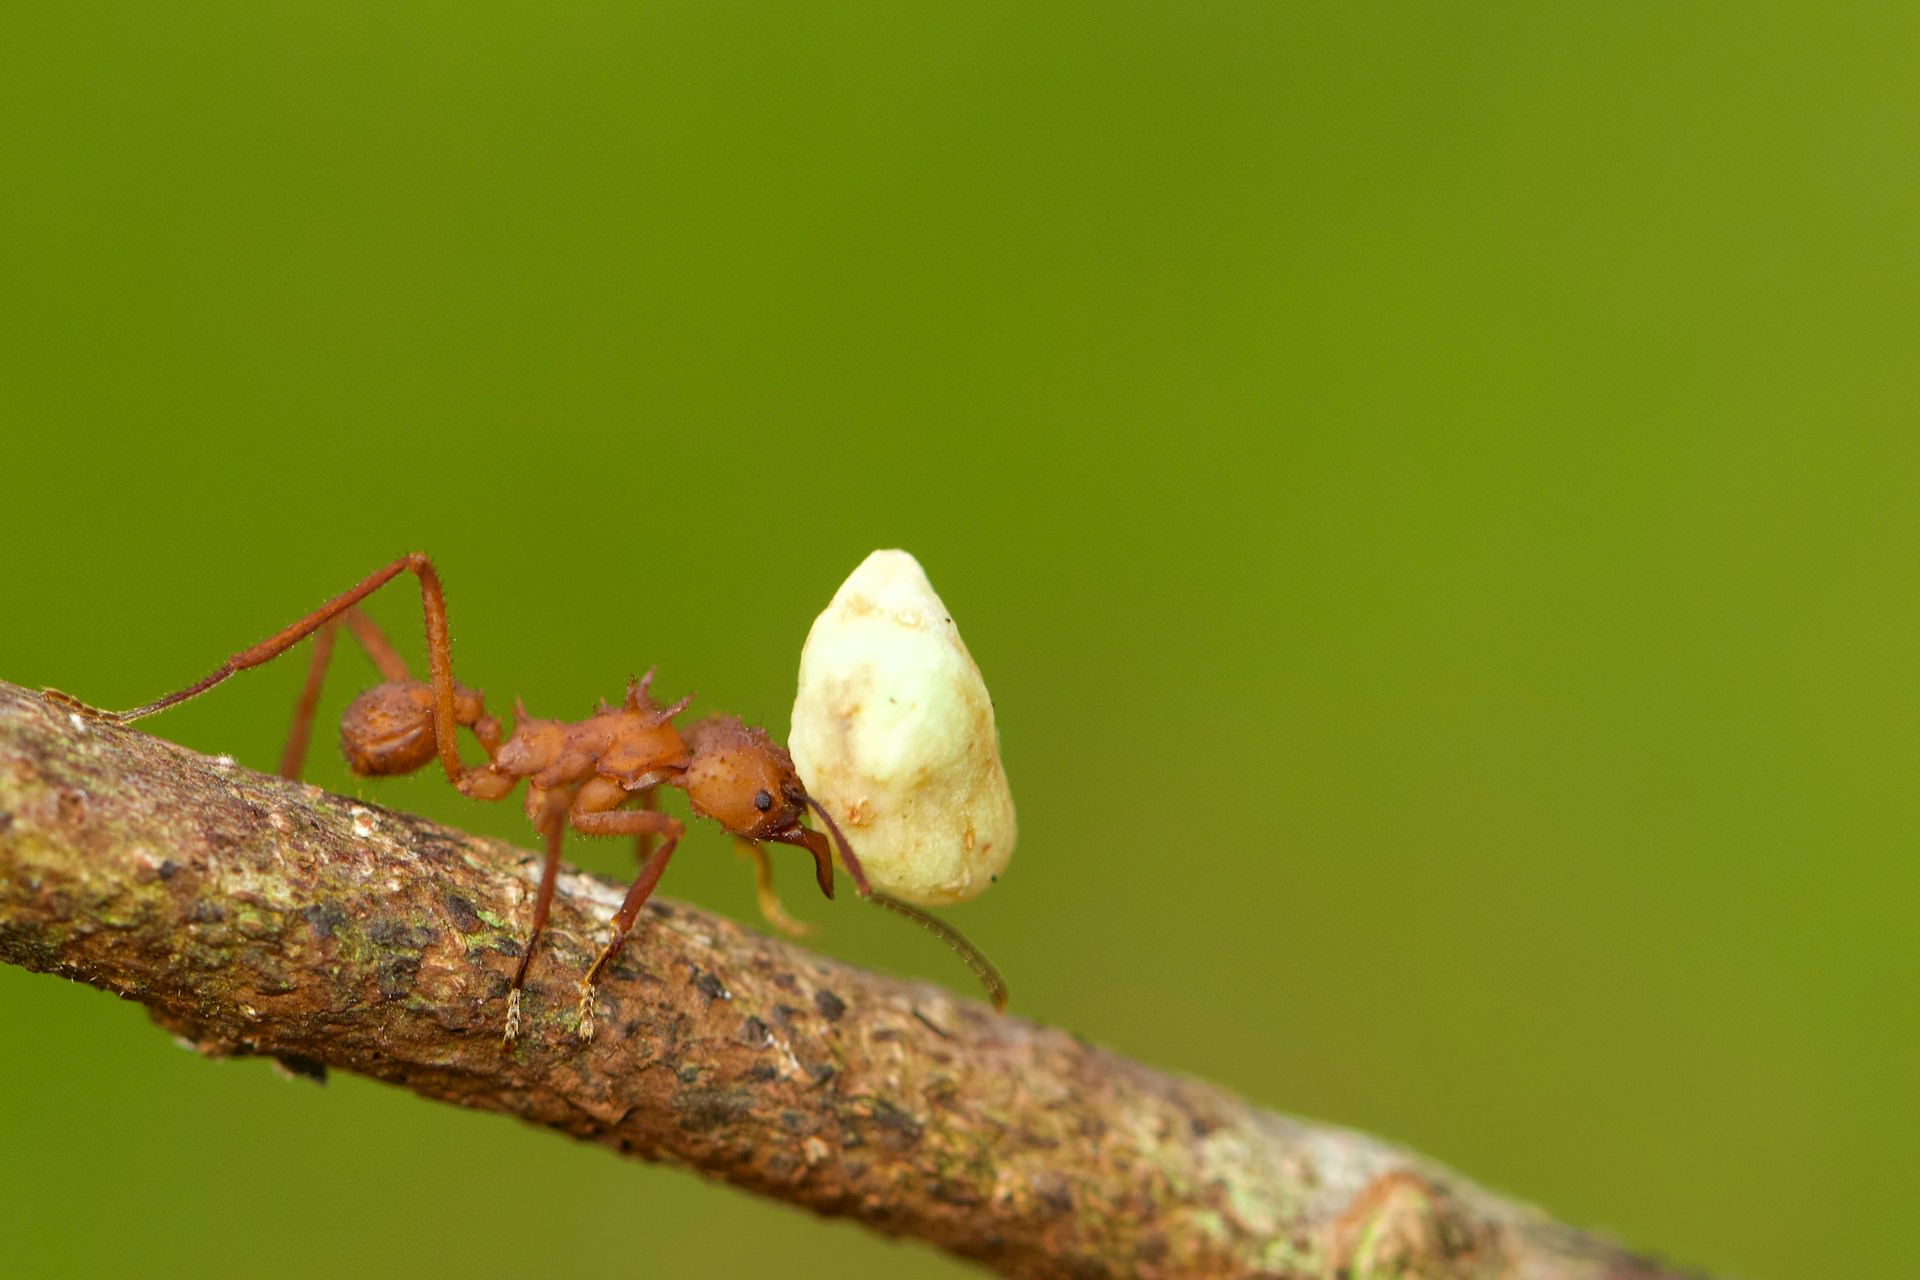 Long before humans started cultivating crops, ants were already masters of sustainable farming. For over 60 million years, these tiny insects have been growing fungus underground, using techniques that even help their crops resist diseases.